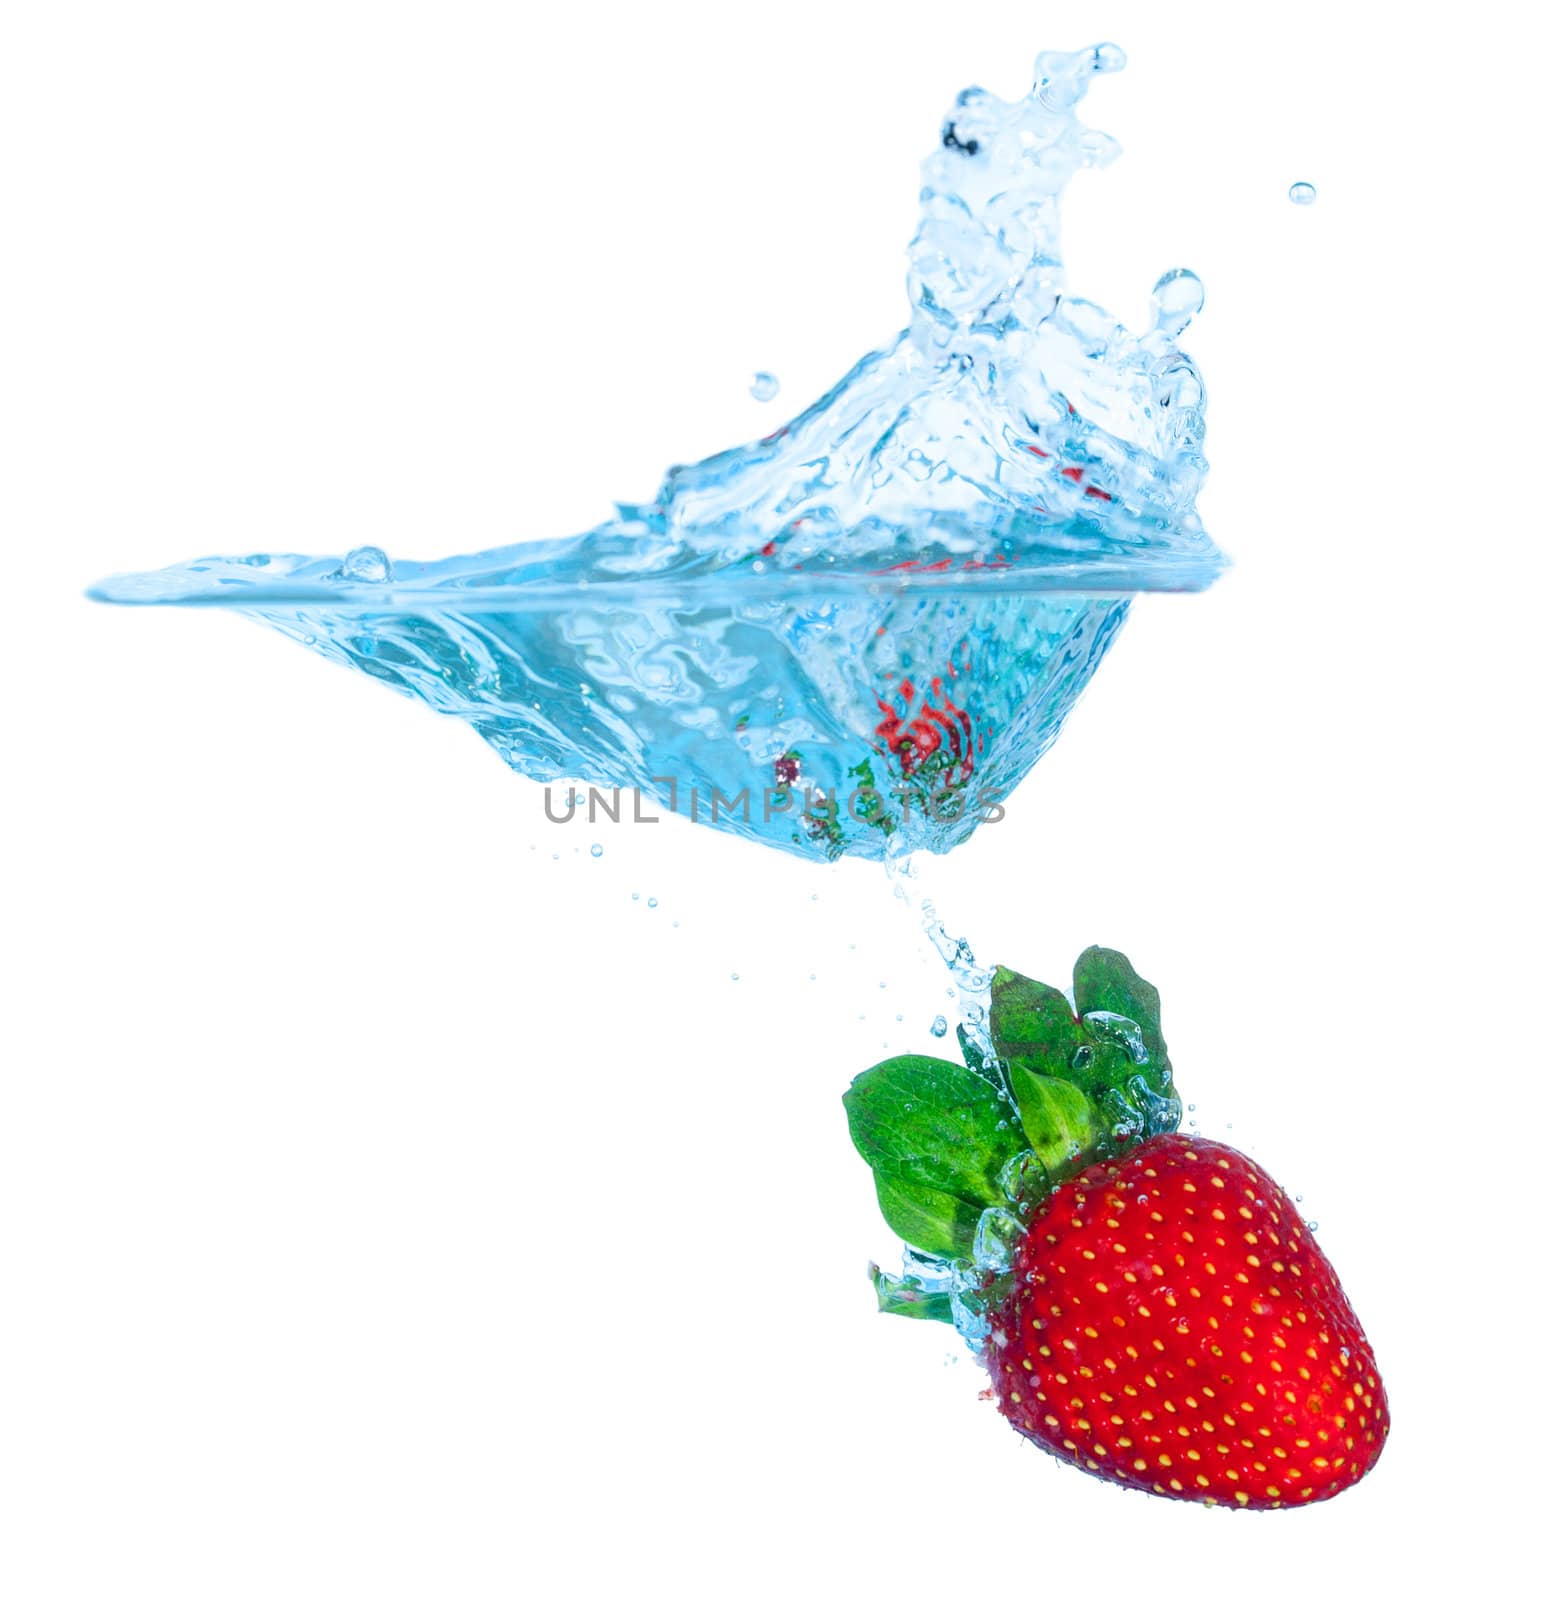 Fresh Strawberry Dropped into Water with Splash by Discovod